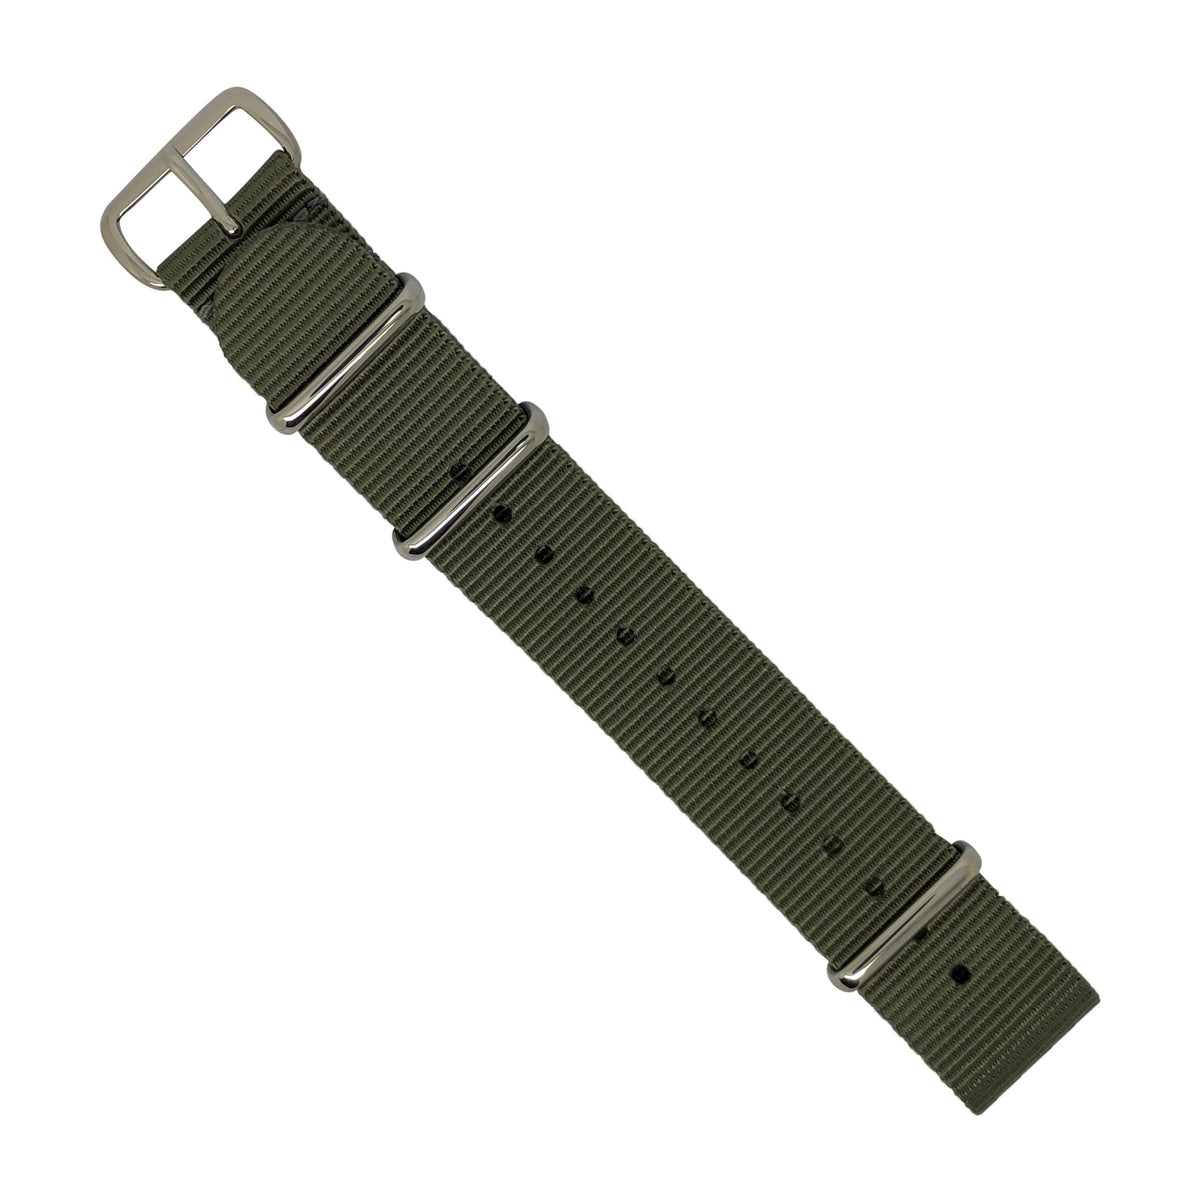 Premium Nato Strap in Grey with Polished Silver Buckle (18mm) - Nomad Watch Works Malaysia